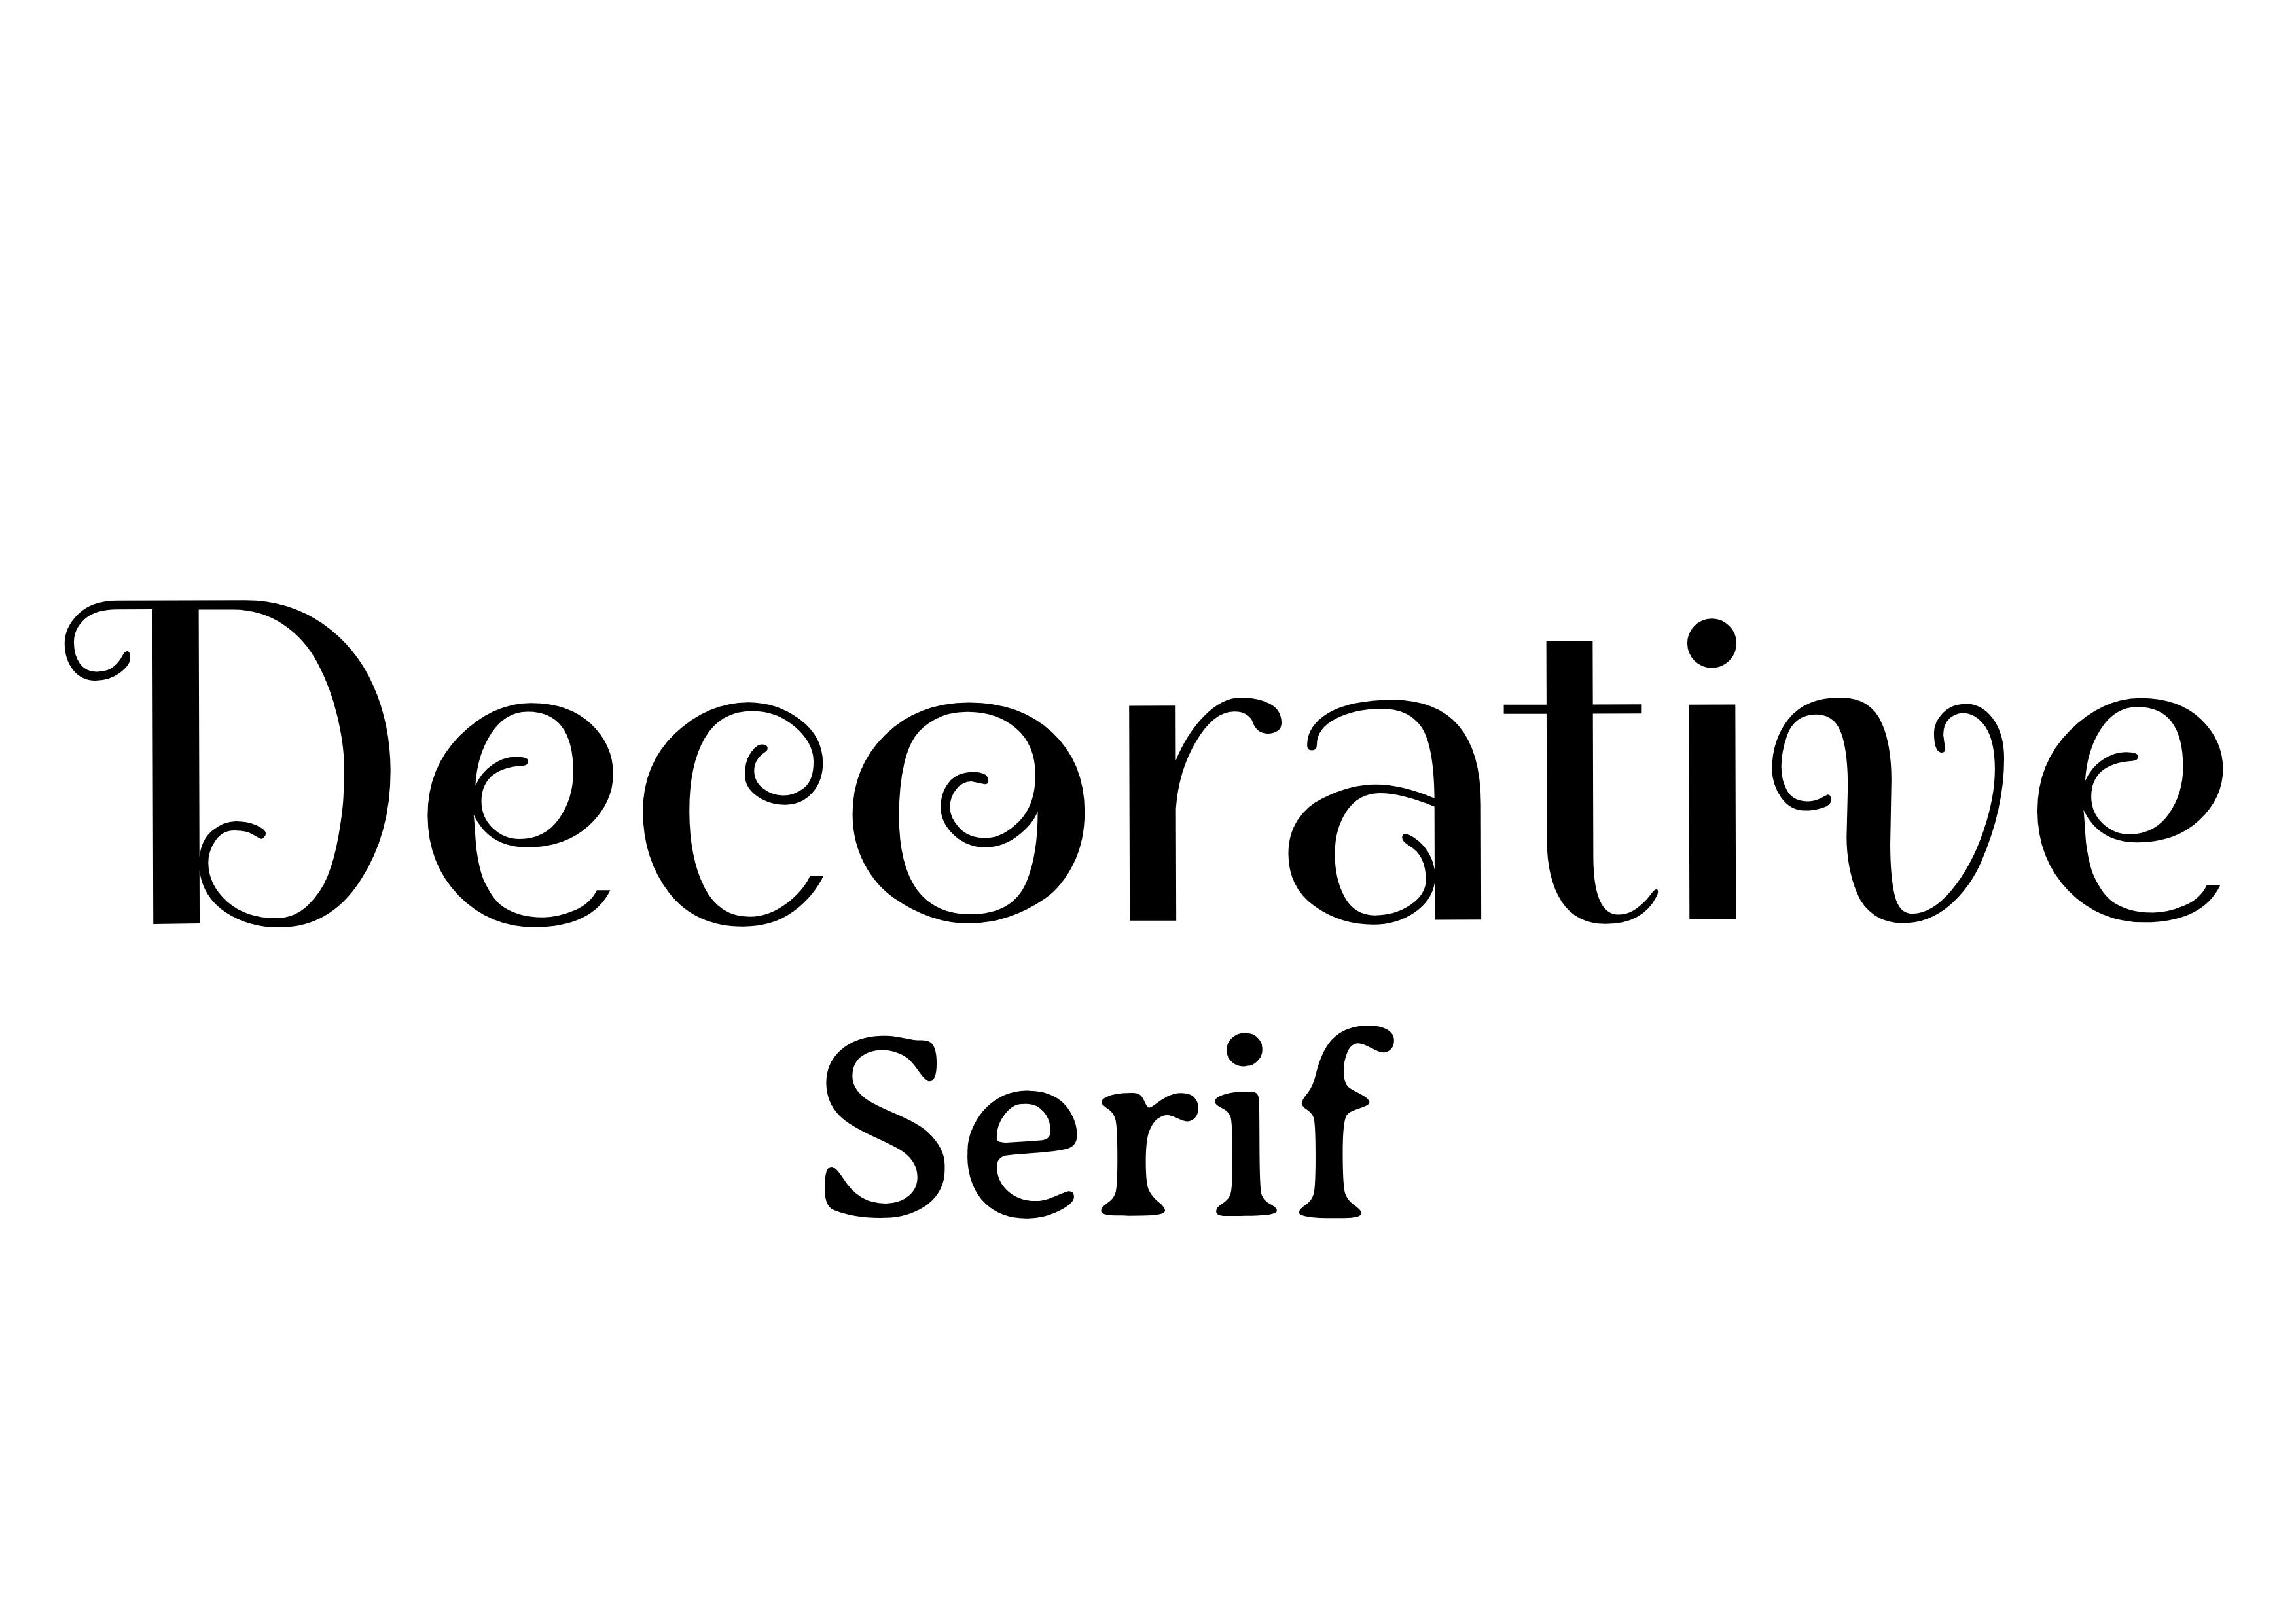 Font Pairing - 'Decorative' in the centre in black with 'Serif' in black underneath smaller - The complete guide to fonts: 5 essential types of fonts in typography - Image